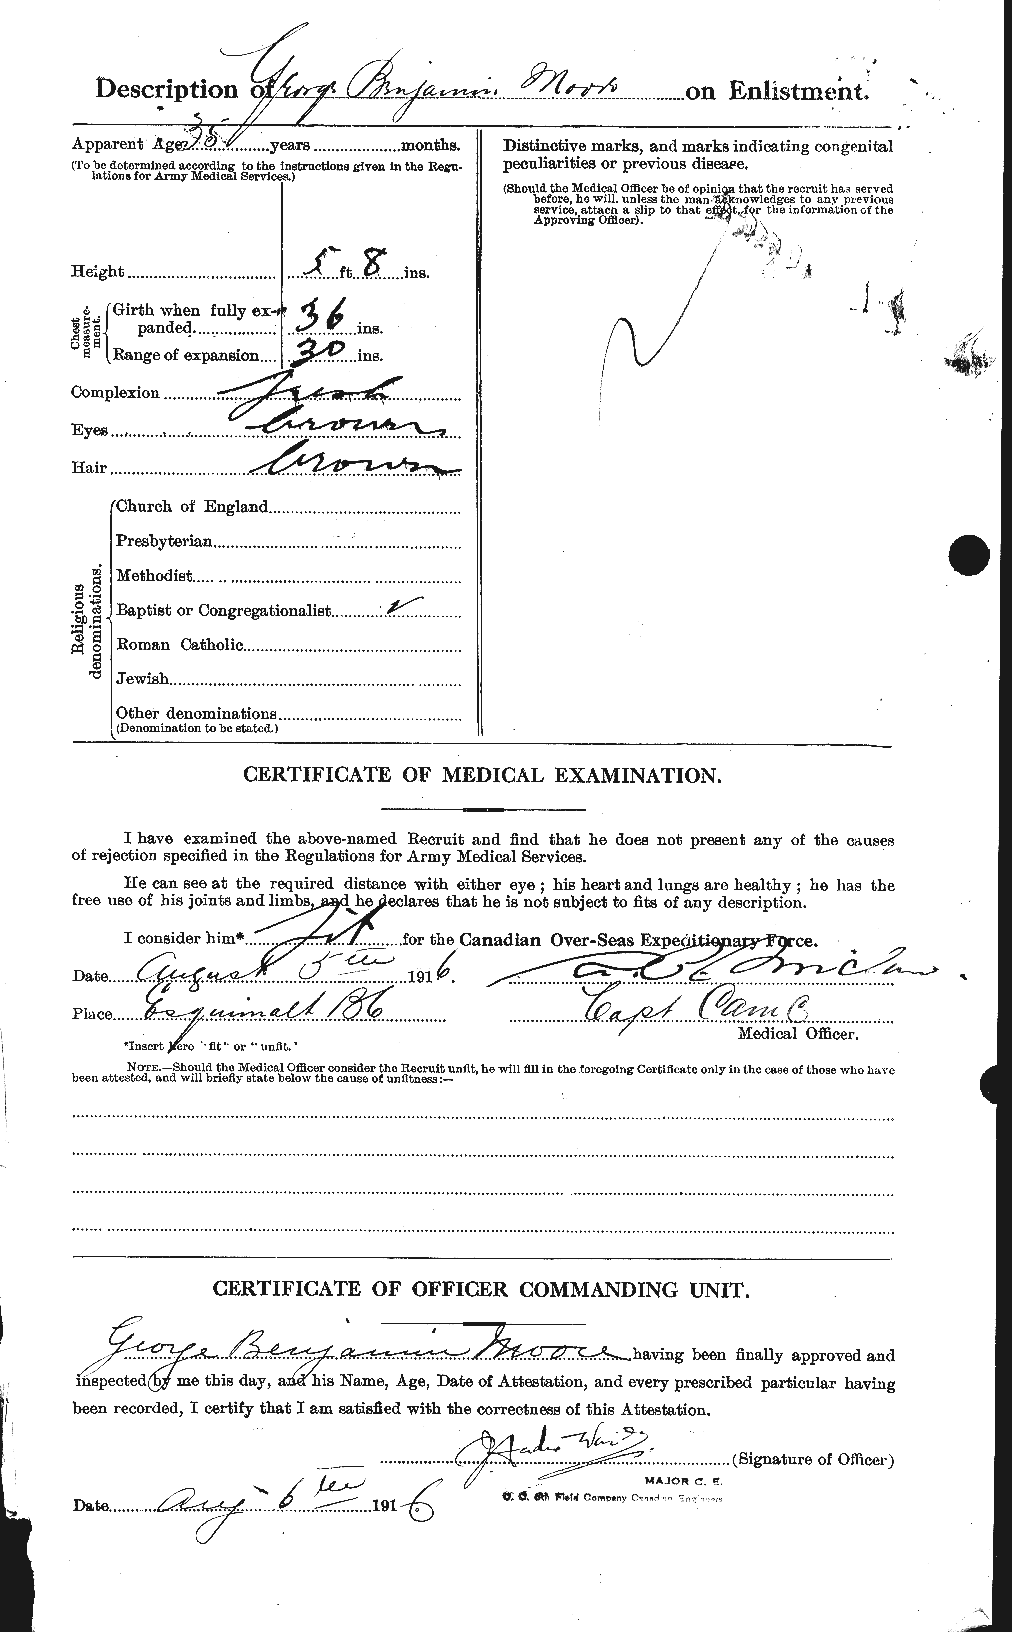 Personnel Records of the First World War - CEF 501991b